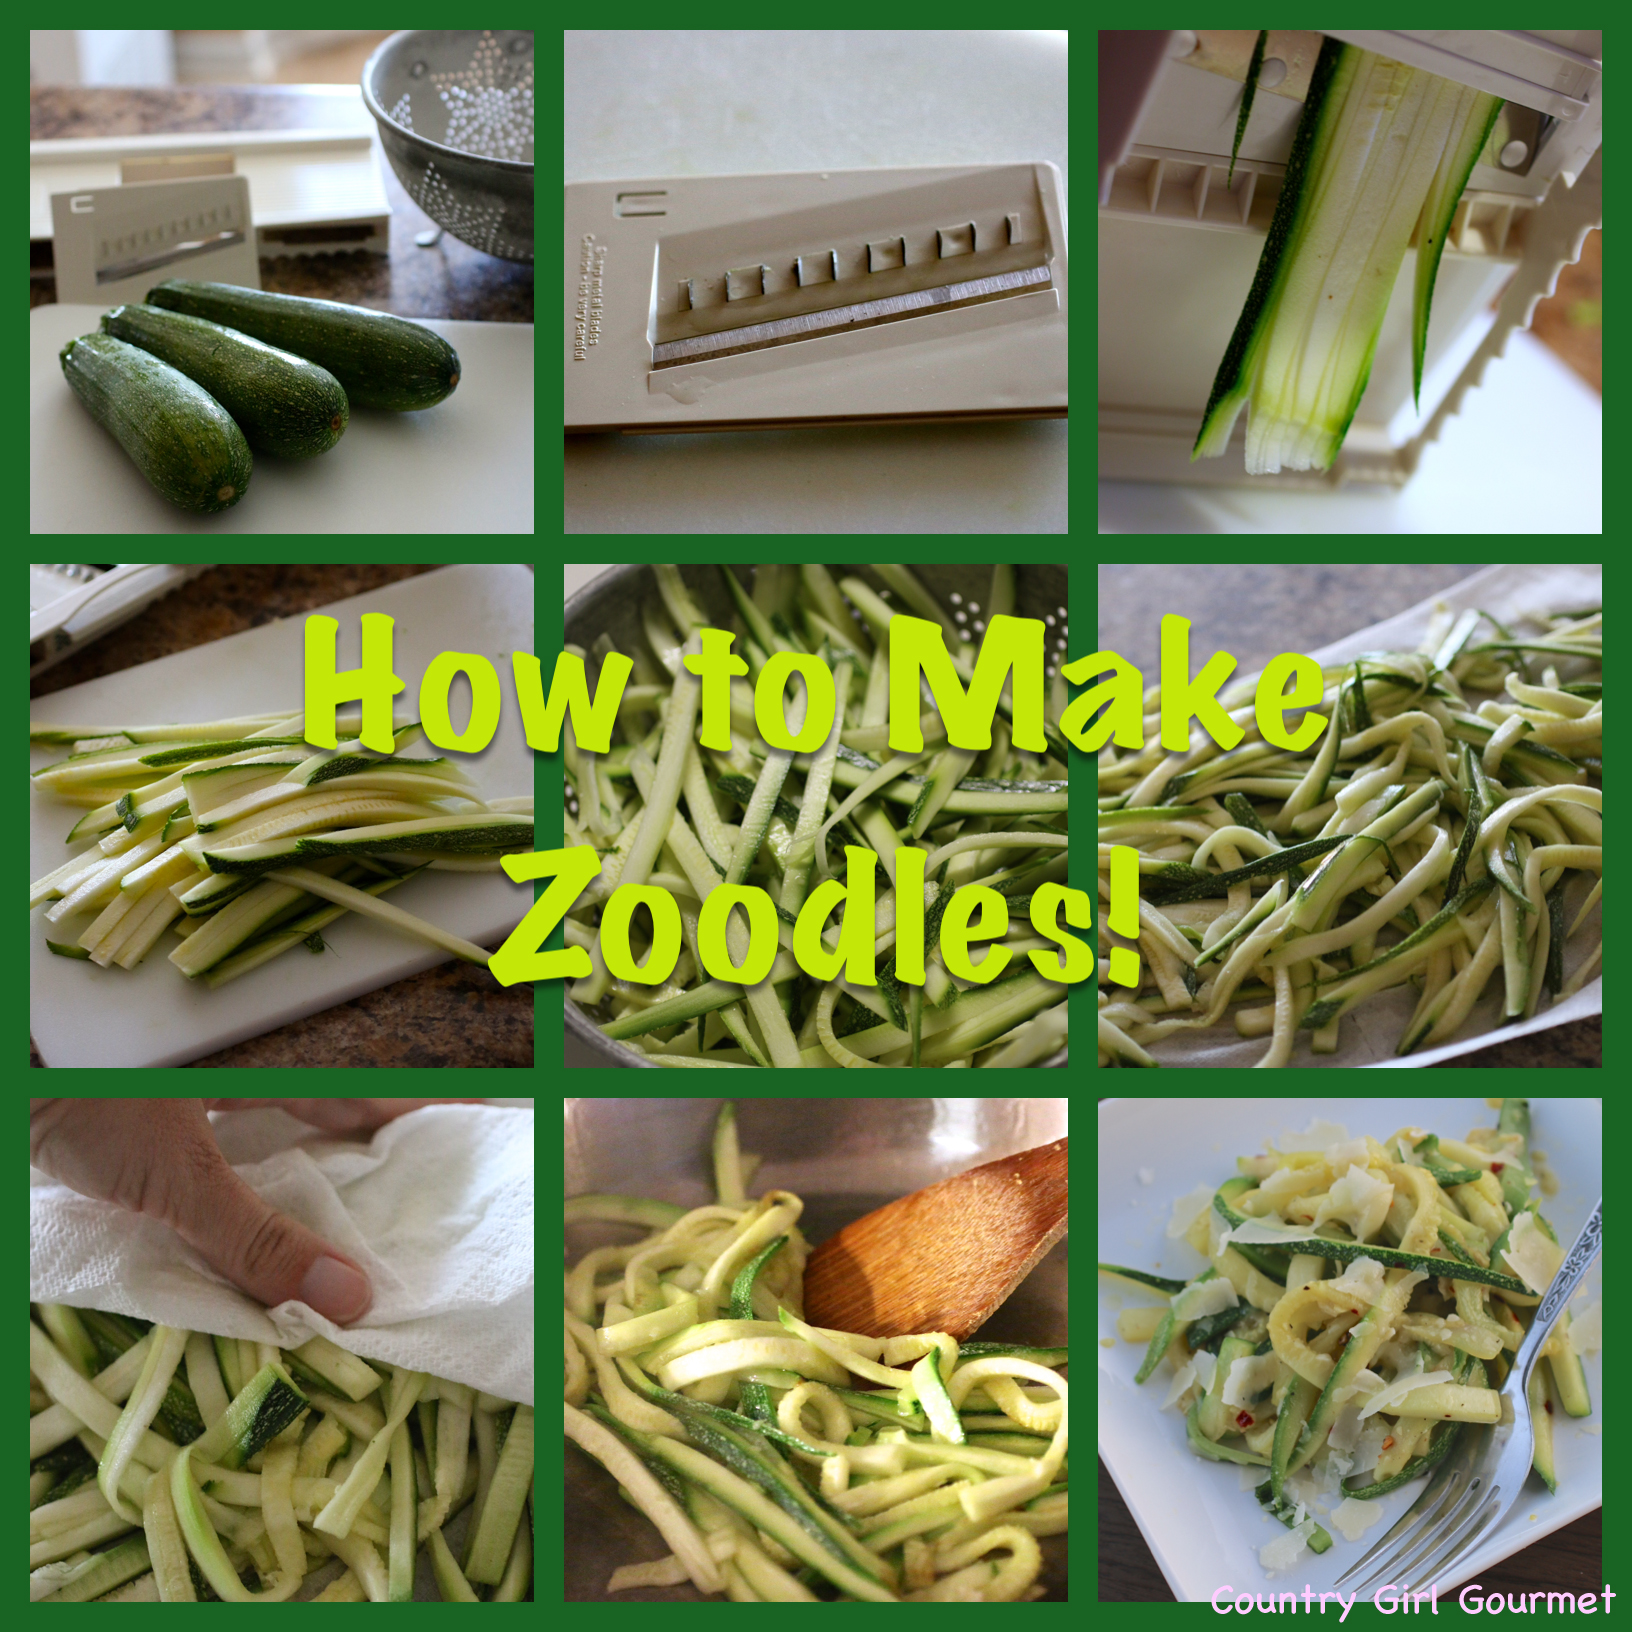 How to Make Zoodles!